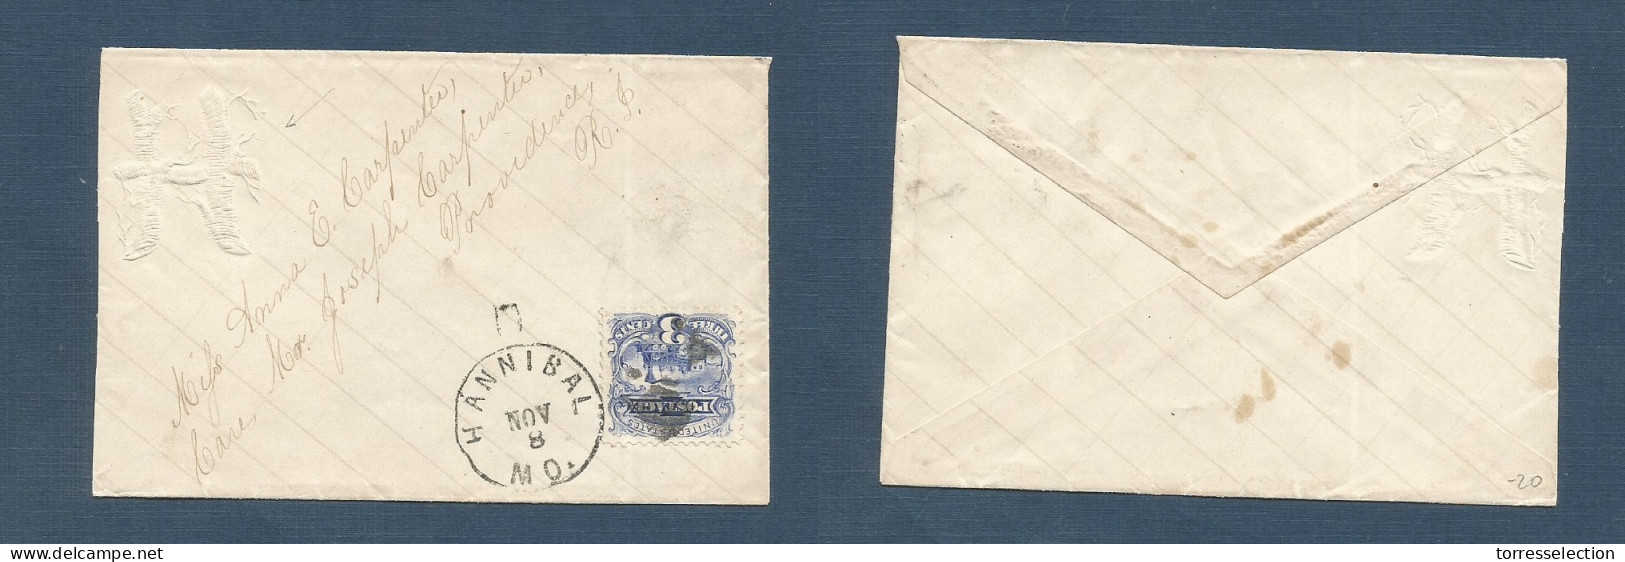 USA - Inland. C. 1870. Hanibal, Mo - Providence. 3c Trun 1869 Issue Fkd Embossed Romantic Envelope. XSALE. - Other & Unclassified